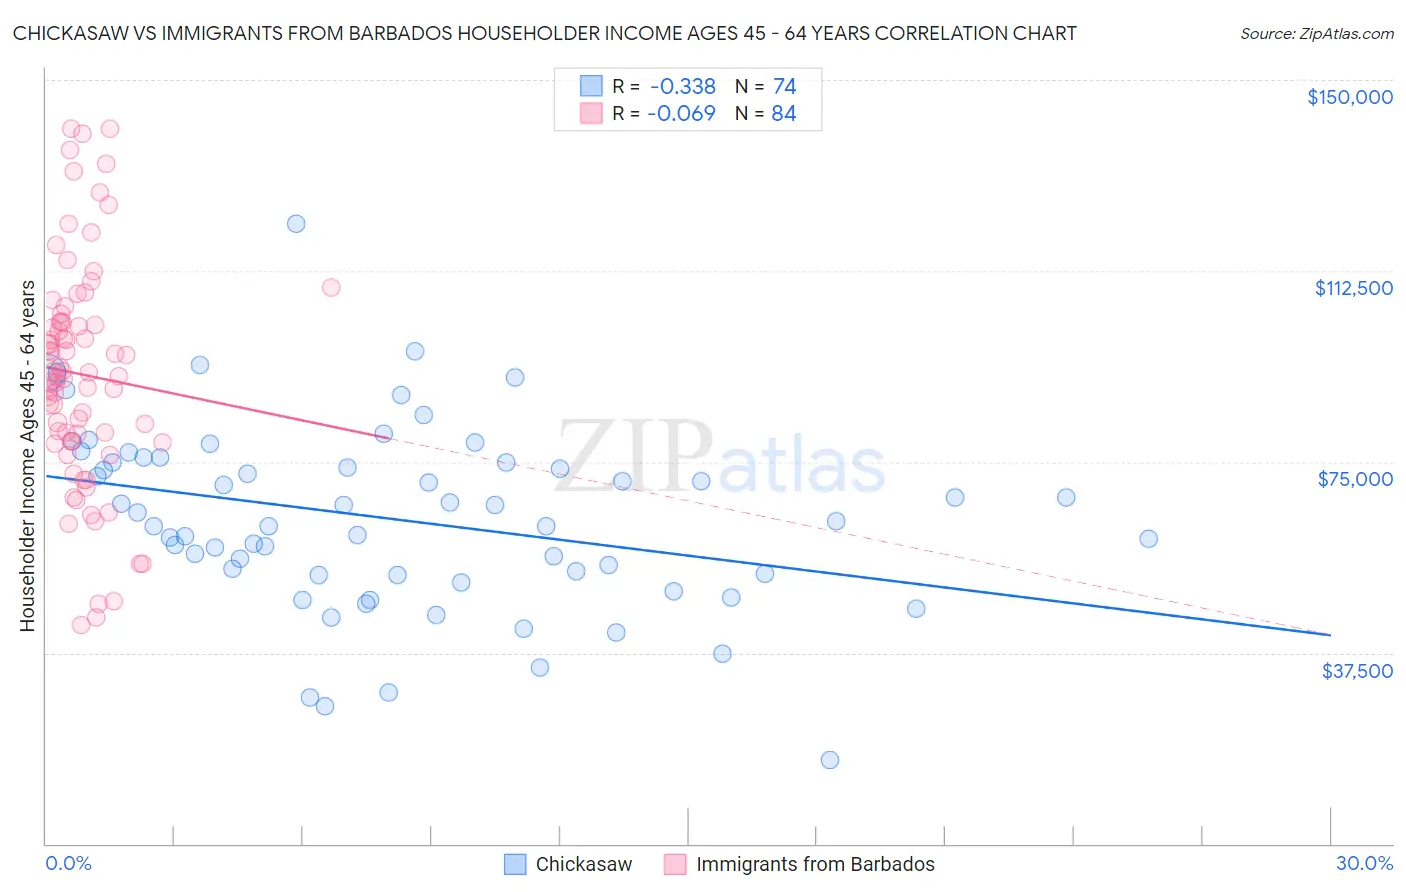 Chickasaw vs Immigrants from Barbados Householder Income Ages 45 - 64 years